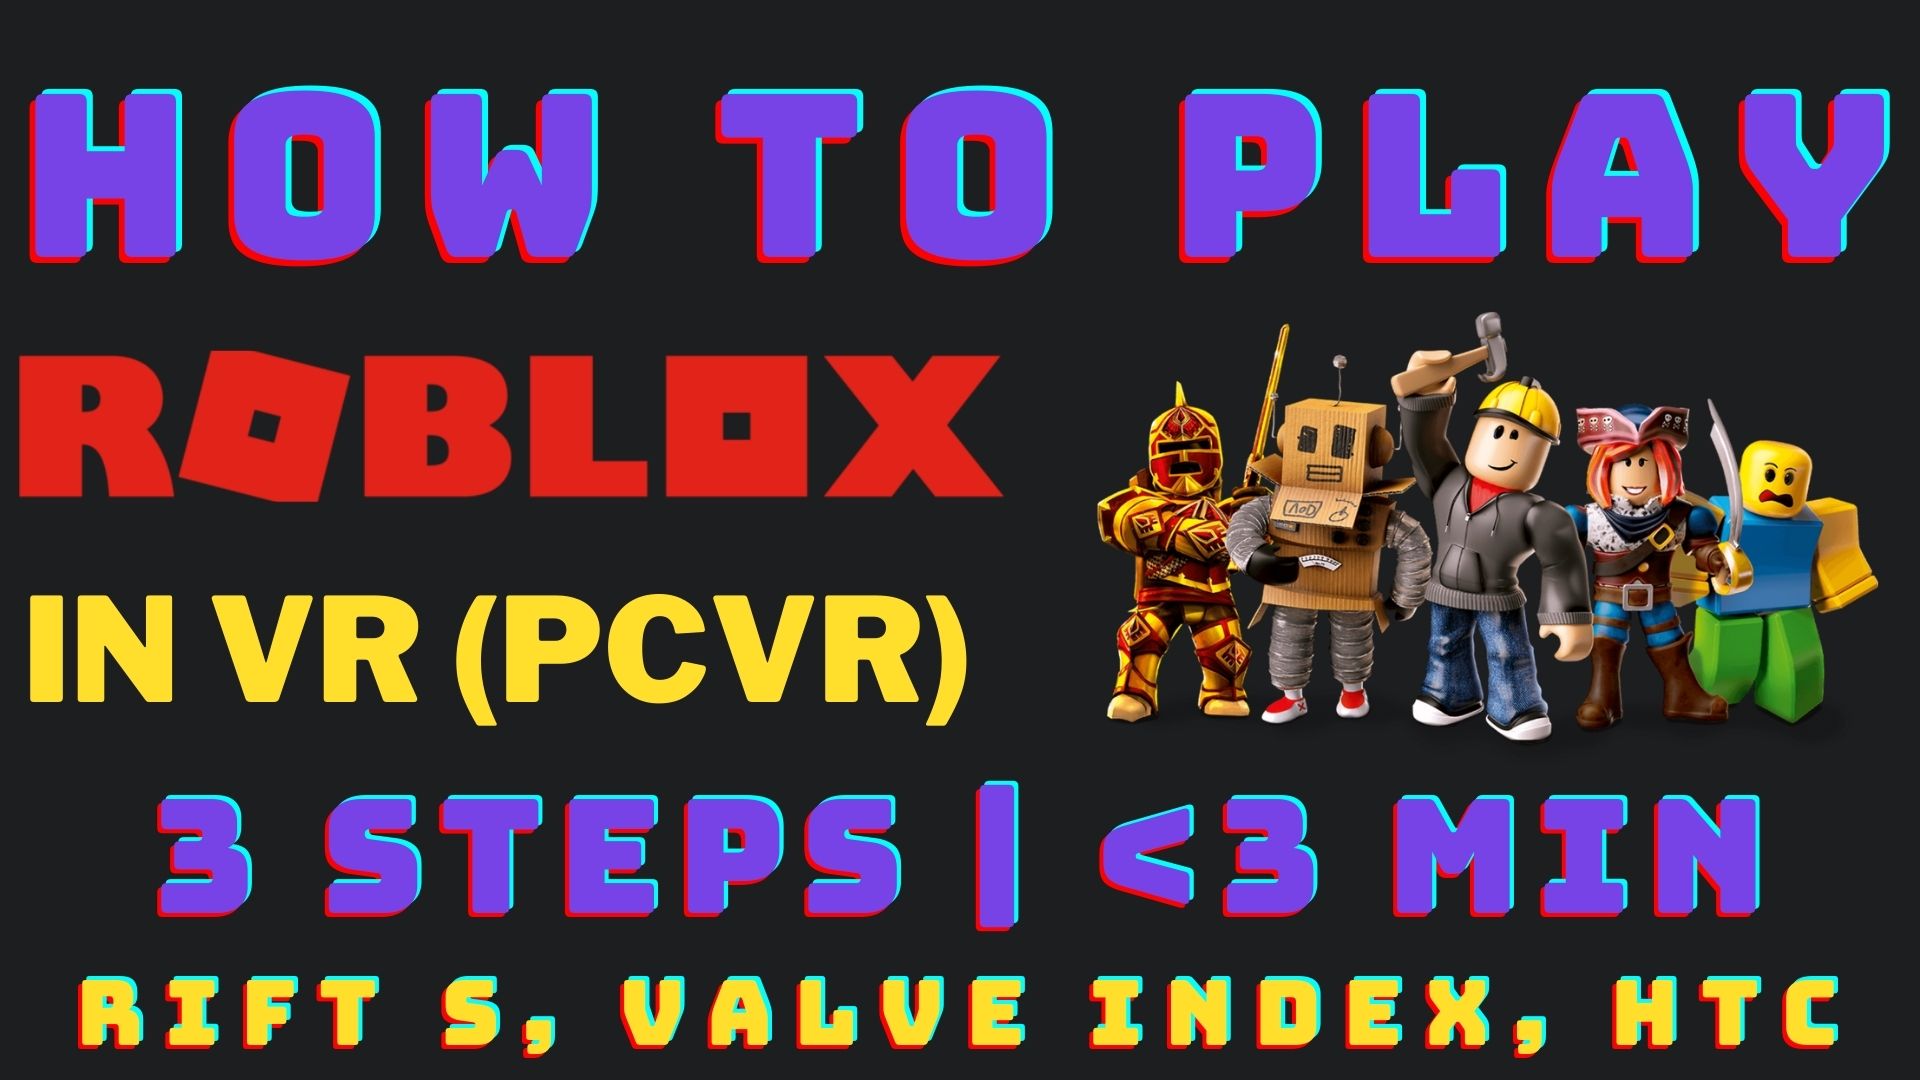 how to make a vr game in roblox